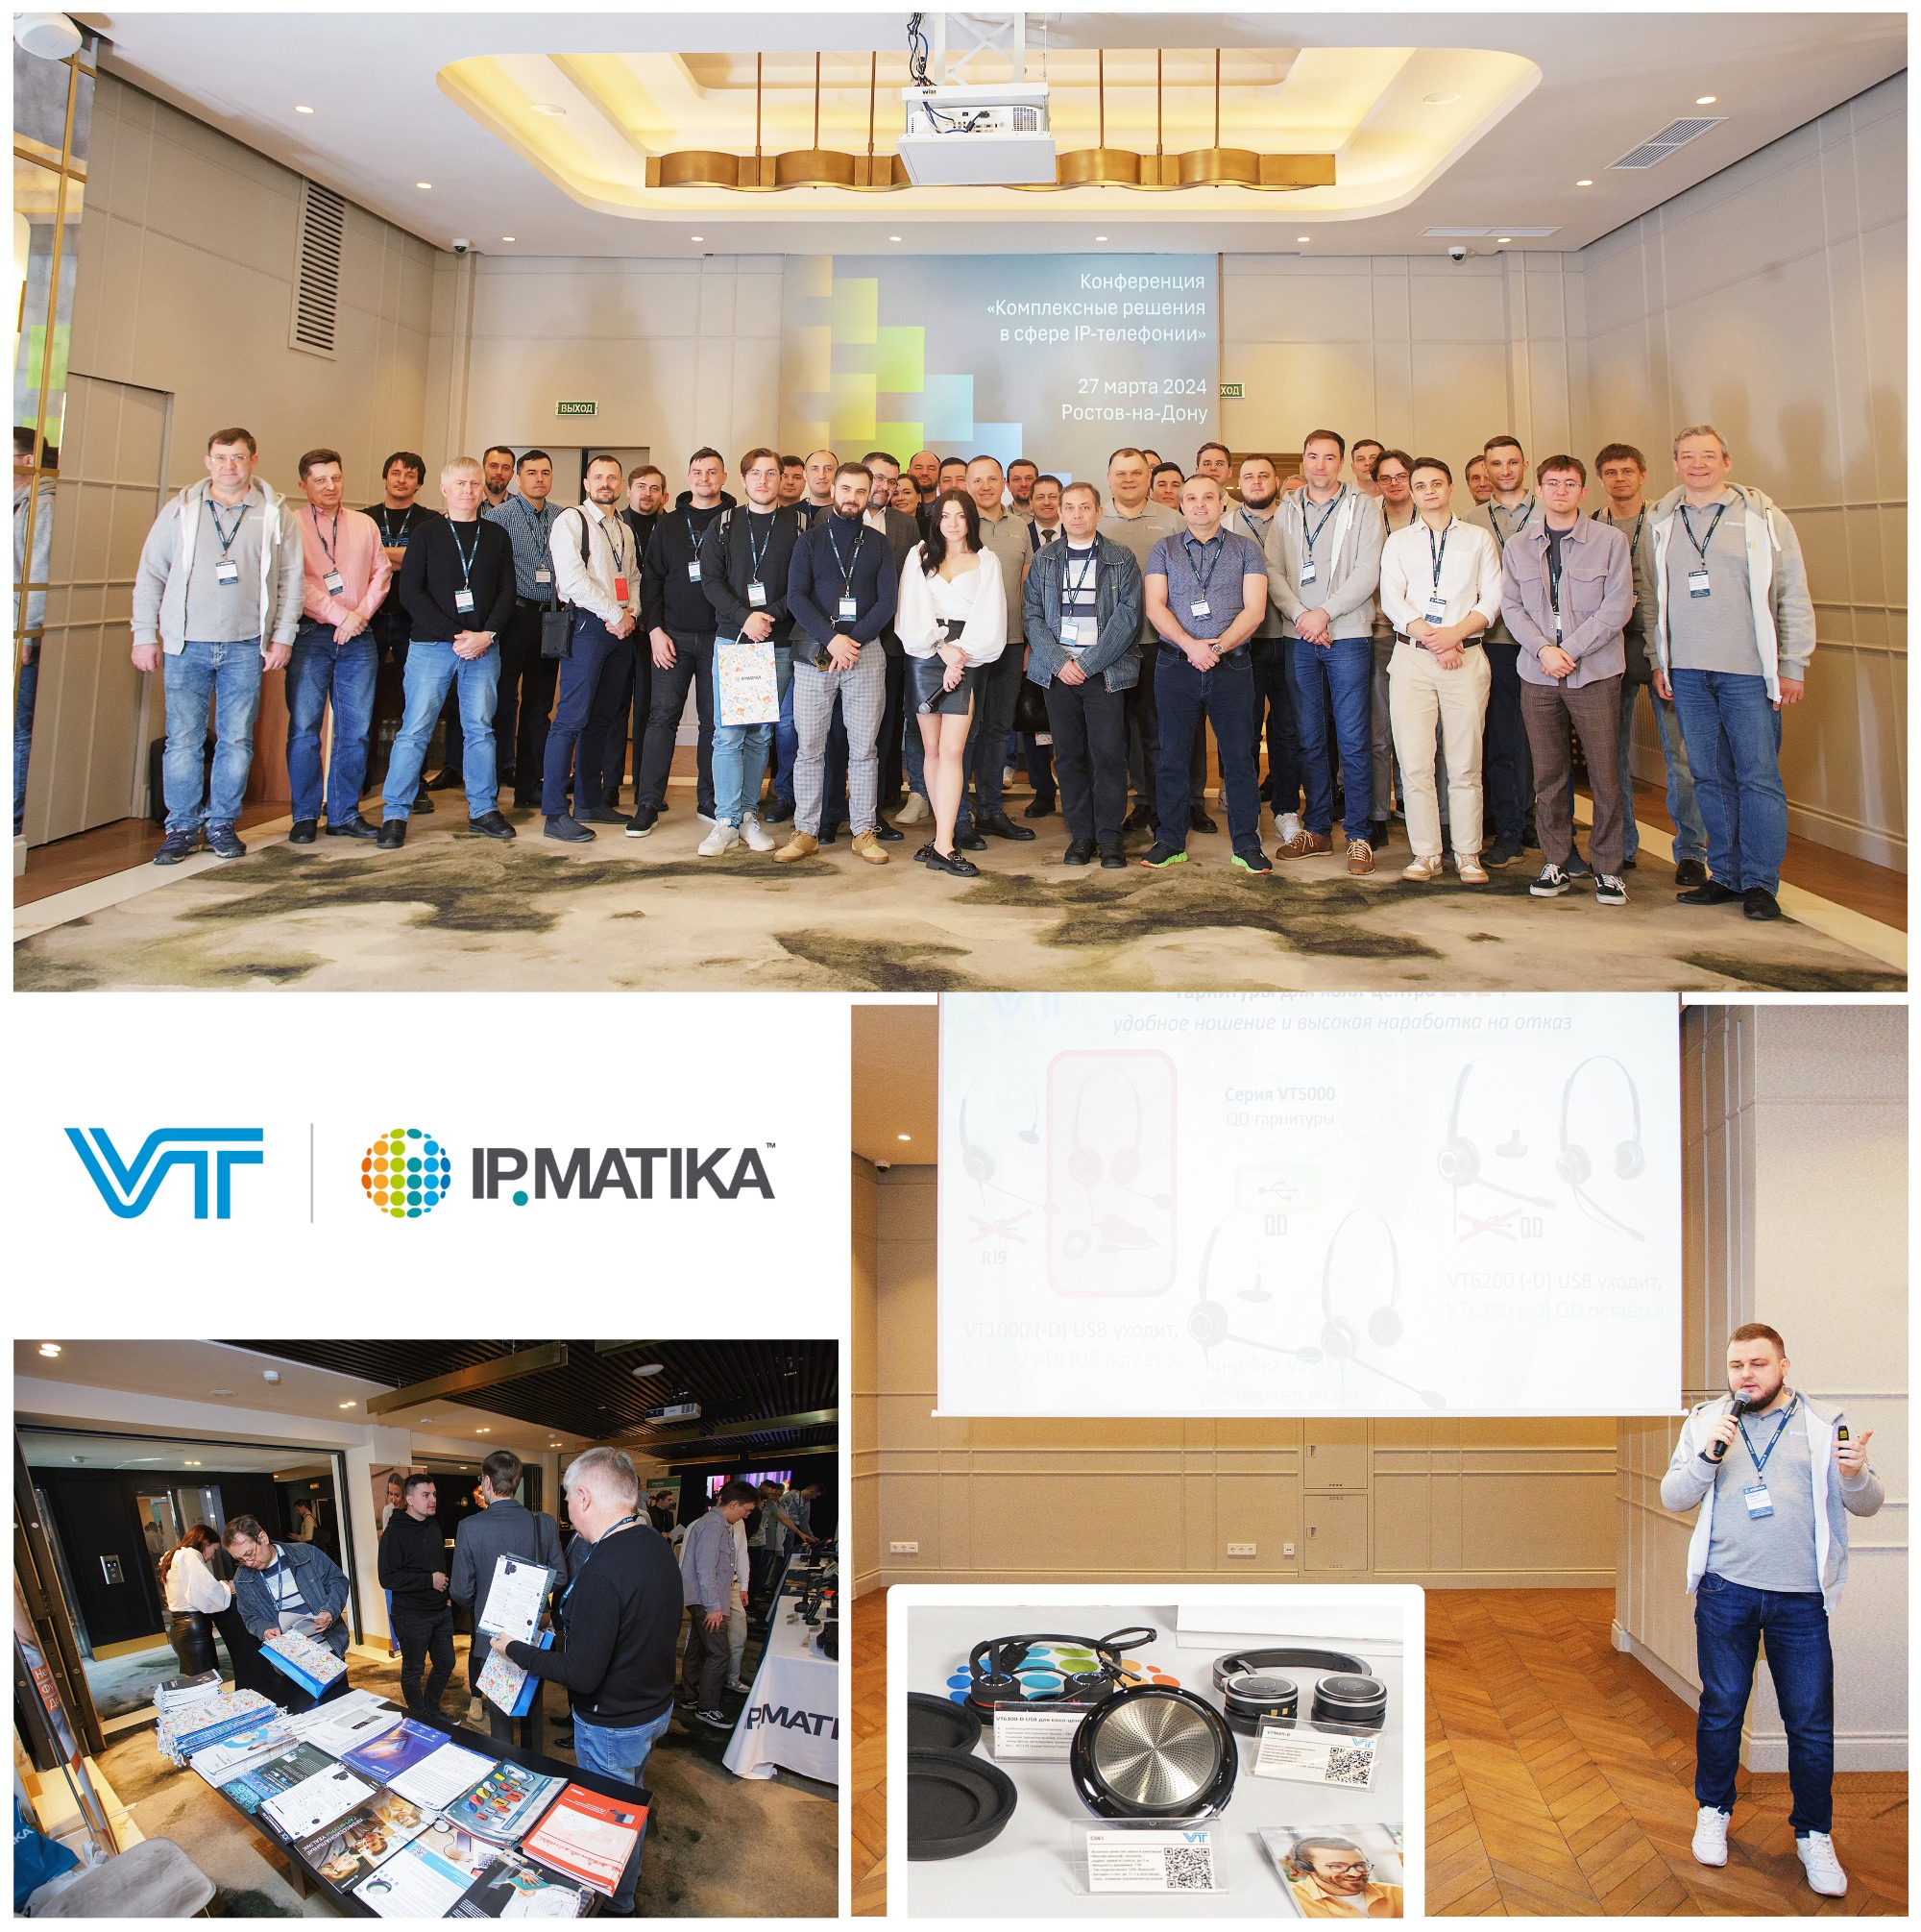 VT Headsets Featured at IP Telephony Solutions Conference Organized by IPMatika